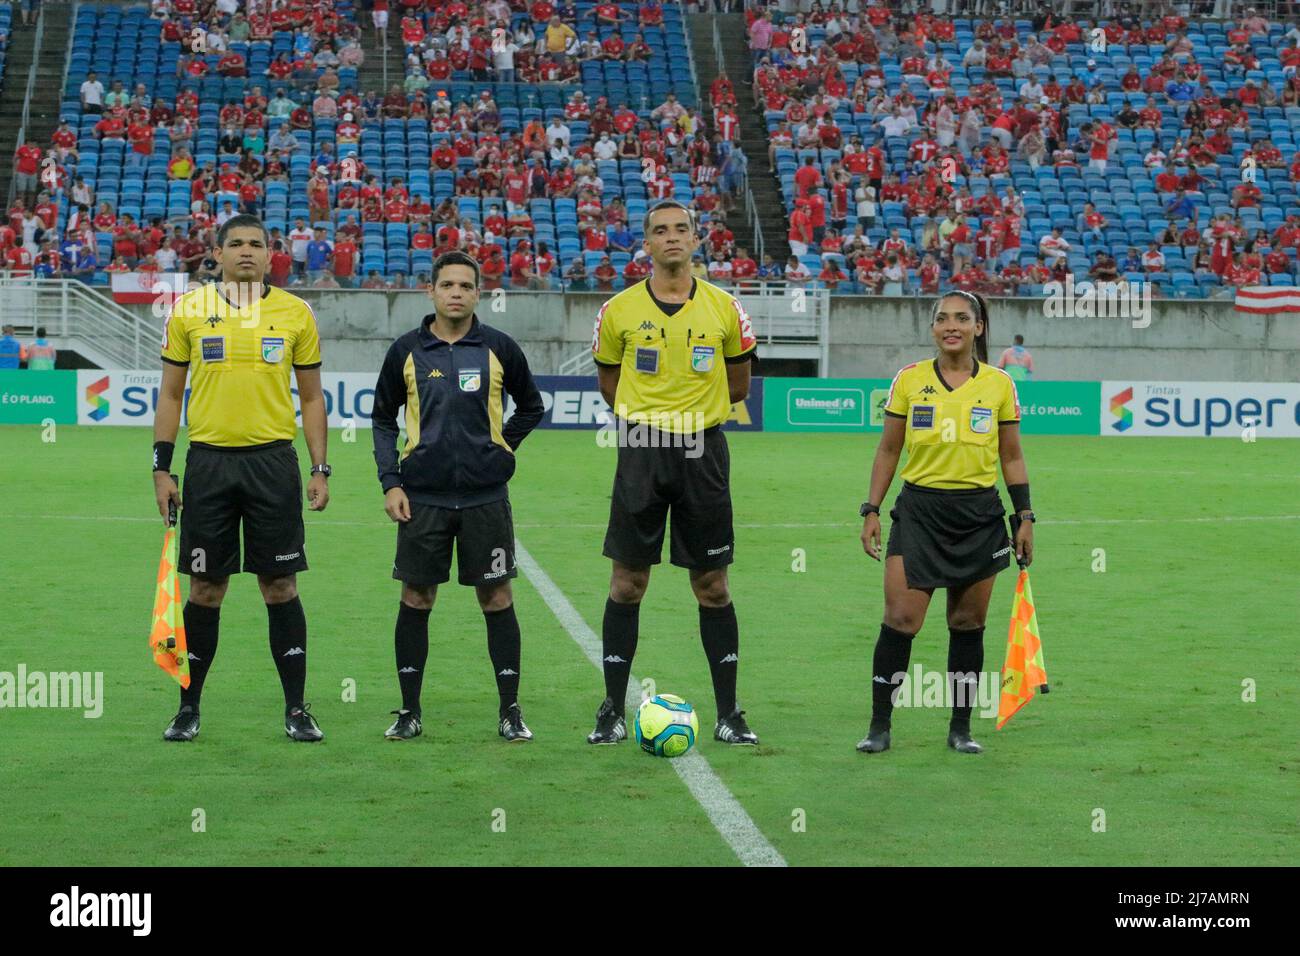 RN - Natal - 05/07/2022 - BRAZILIAN D 2022, AMERICA/RN X RETRO - The referee during a match between America-RN and Retro at the Arena das Dunas stadium for the Brazilian championship D 2022. Photo: Augusto Ratis/AGIF/Sipa USA Stock Photo